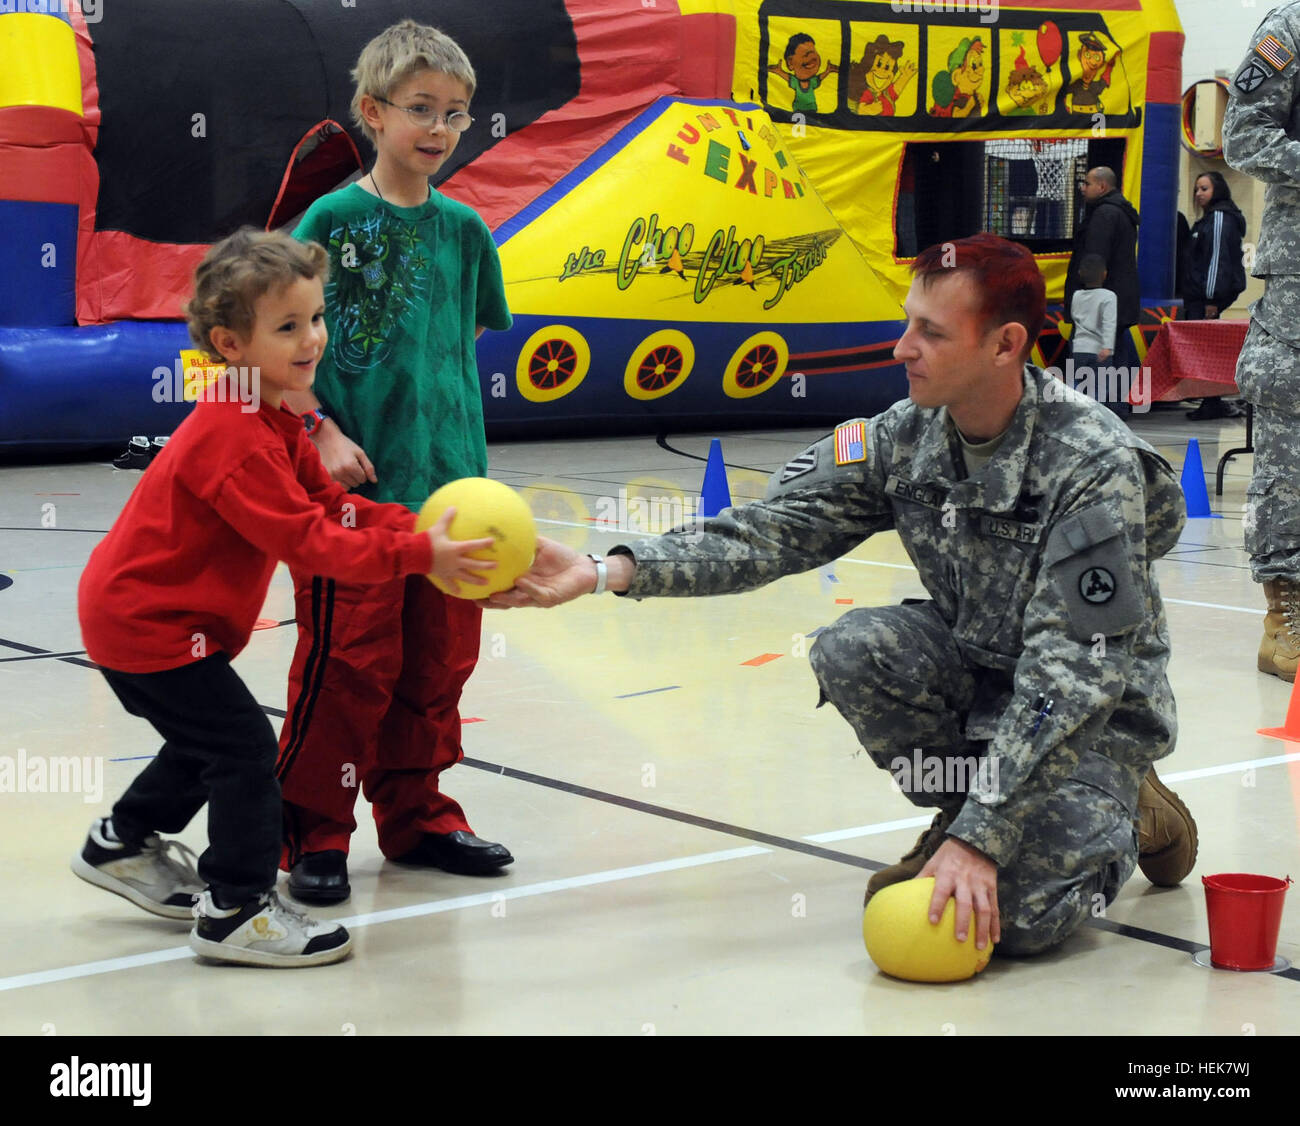 Sgt. 1st Class Andrew England, with the 3rd Sustainment Command (Expeditionary), hands a bowling ball to a Pierce Elementary School student at the school's Winter Festival Dec. 2. England and about 24 other soldiers from the 3rd ESC volunteered their time to assist with the school's festival. Sustainers Give Back at Pierce Elementary Winter Fest 347108 Stock Photo